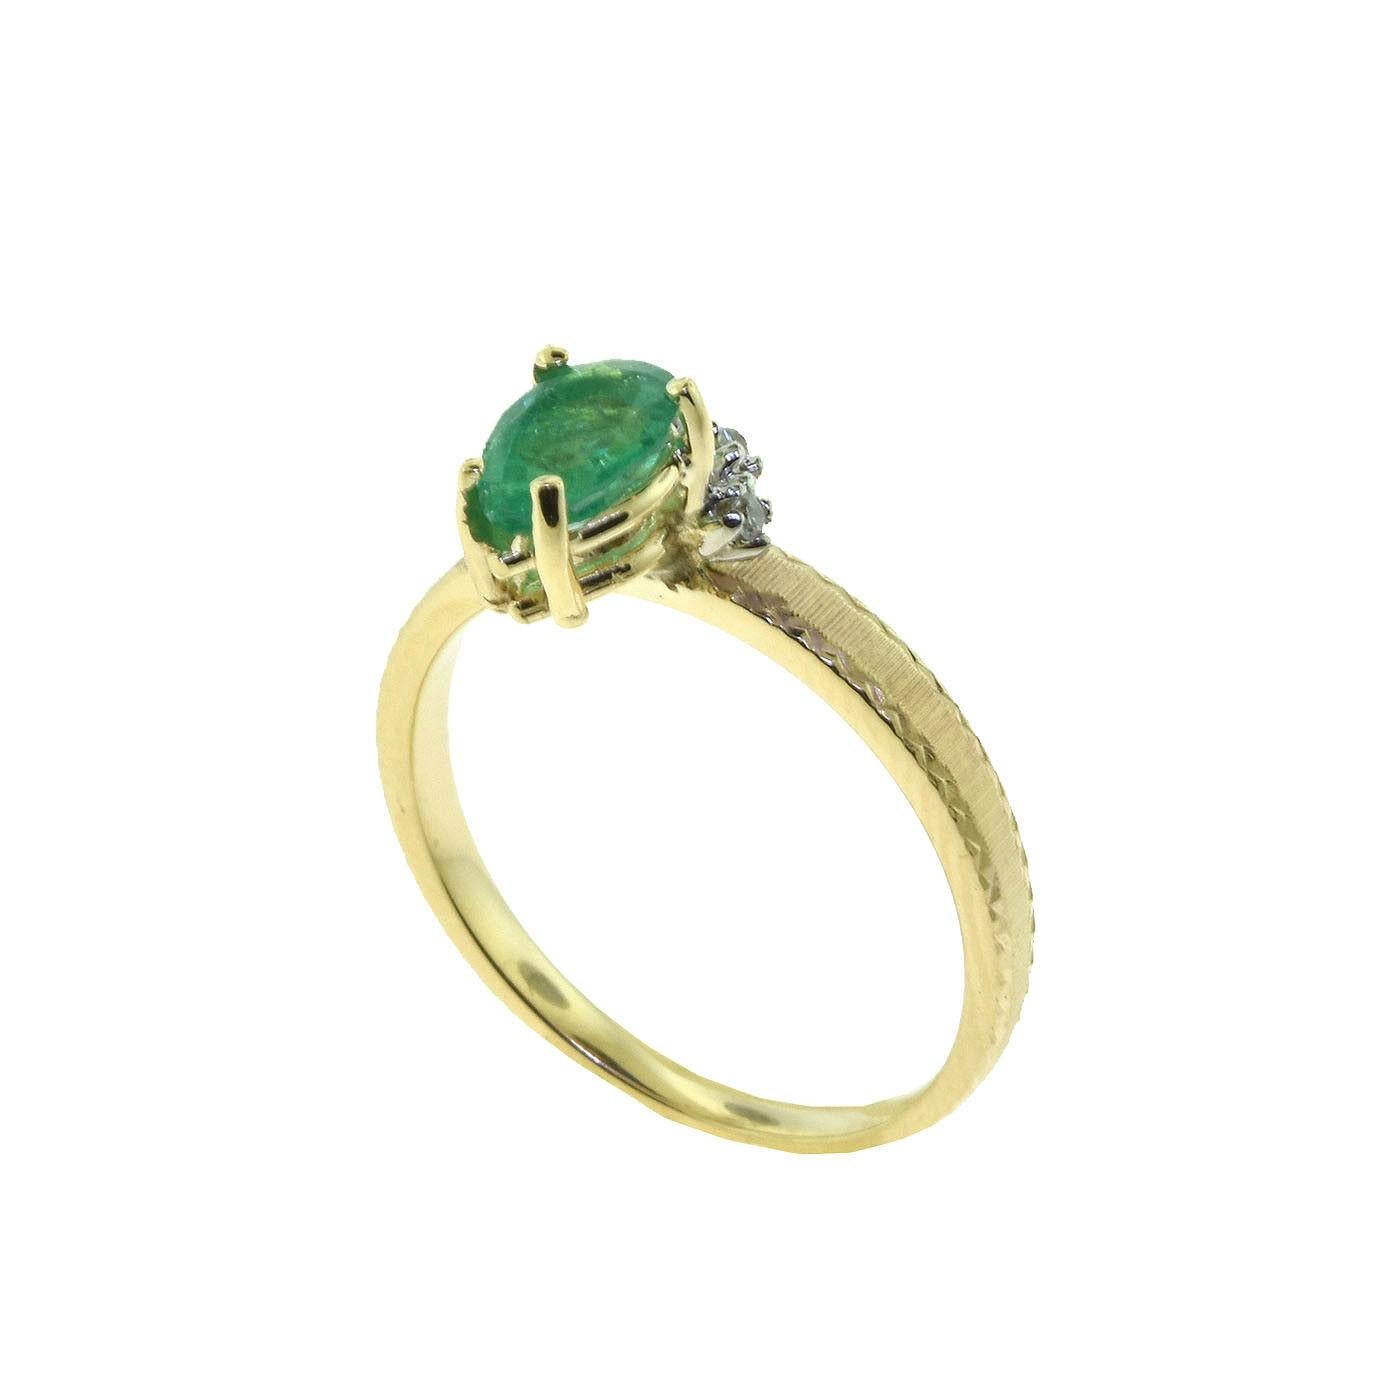 Brilliance Jewels, Miami
Questions? Call Us Anytime!
786,482,8100

Ring Size: 6.25 (sizable)

Style: Multi Gem Stone Elegant Ring

Metal: Yellow Gold

Metal Purity: 14k

Stones: 1 Pear Shaped Emerald

              5 Round Diamonds

Emerald Carat